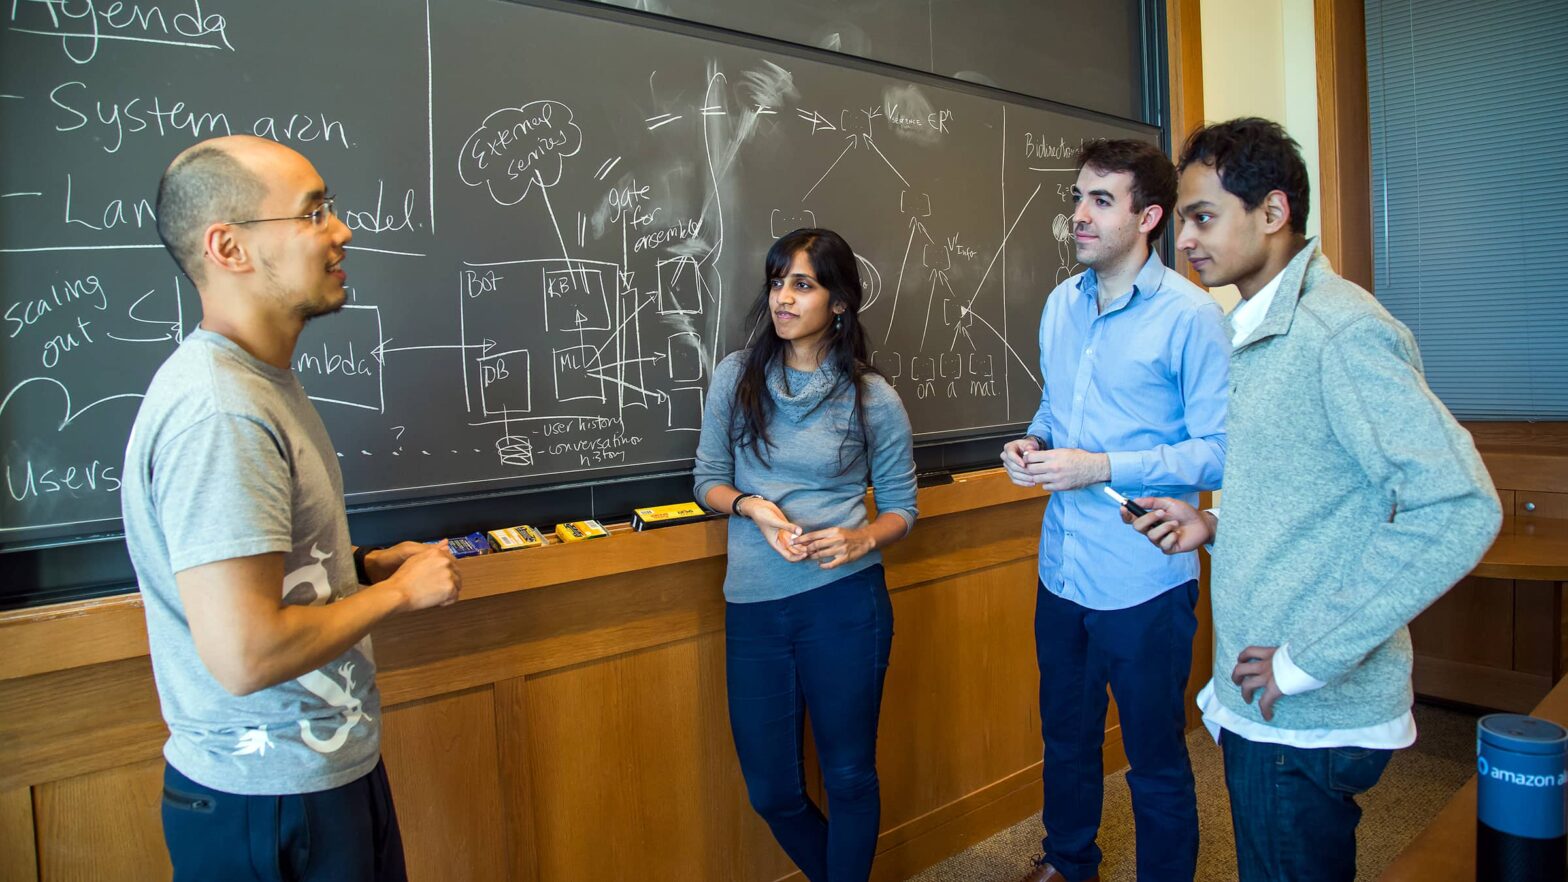 Graduate students discuss their research in front of blackboard